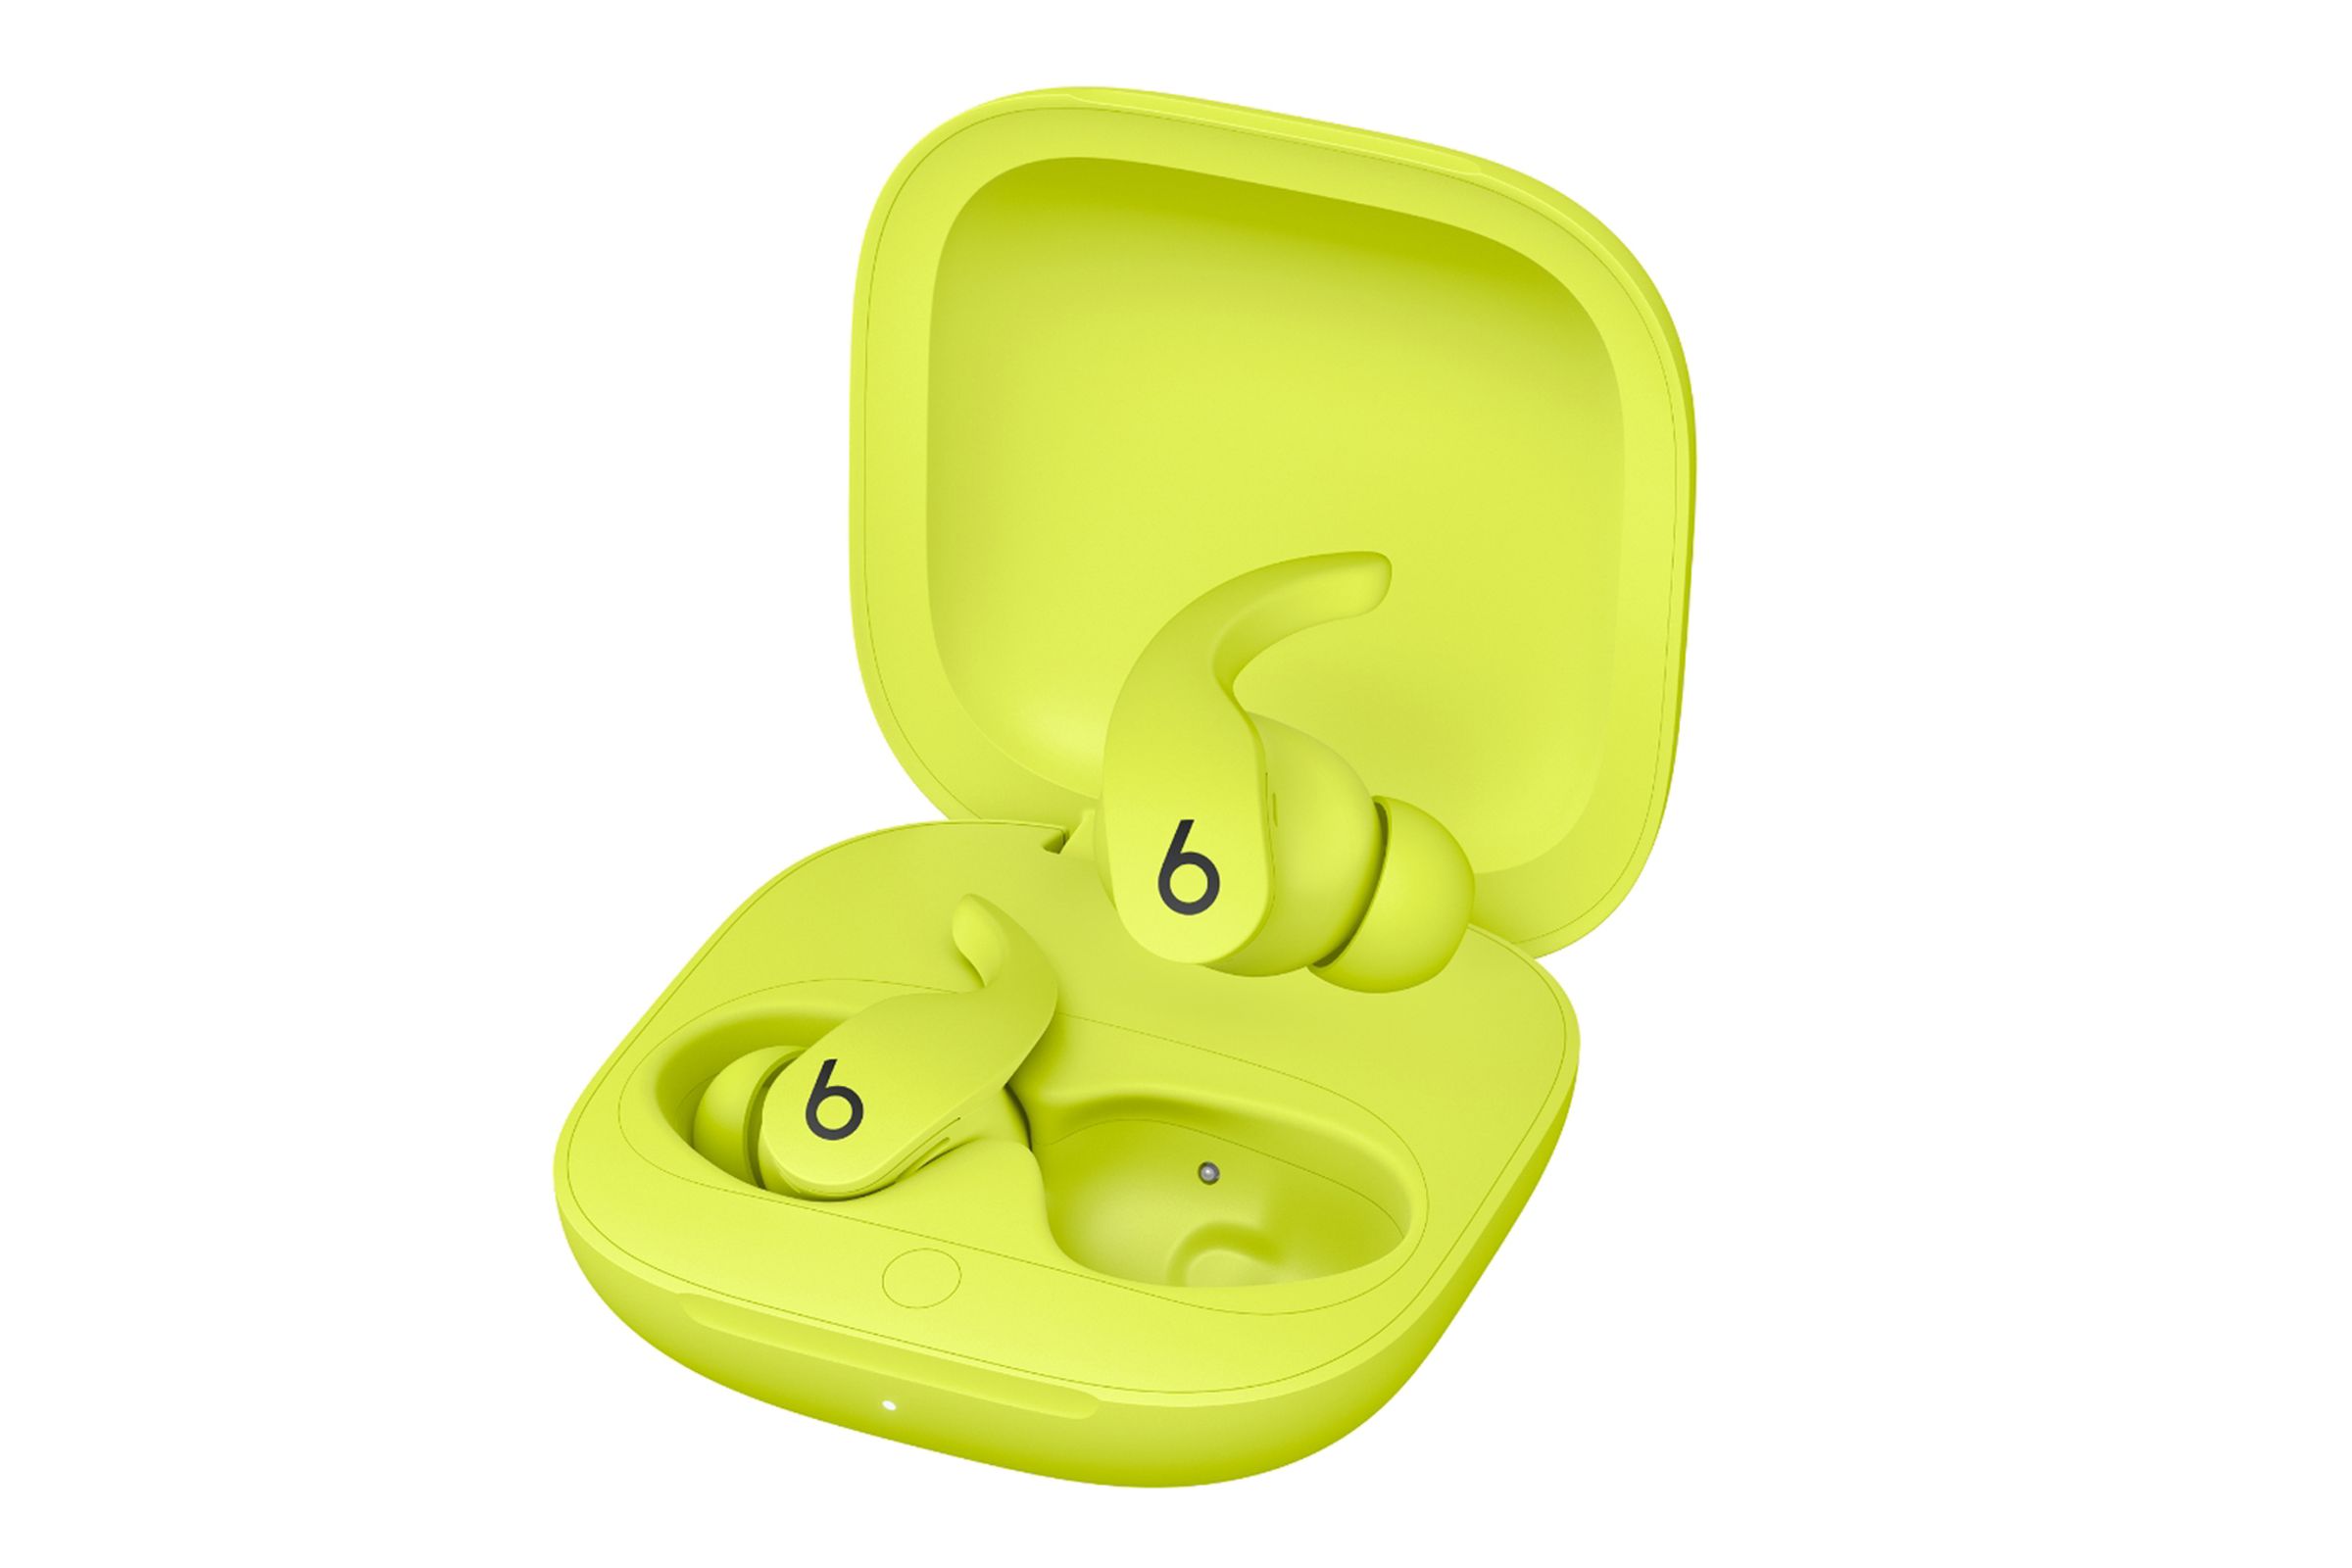 The Beats Fit Pro earbuds in bright yellow with their matching case on a white background.